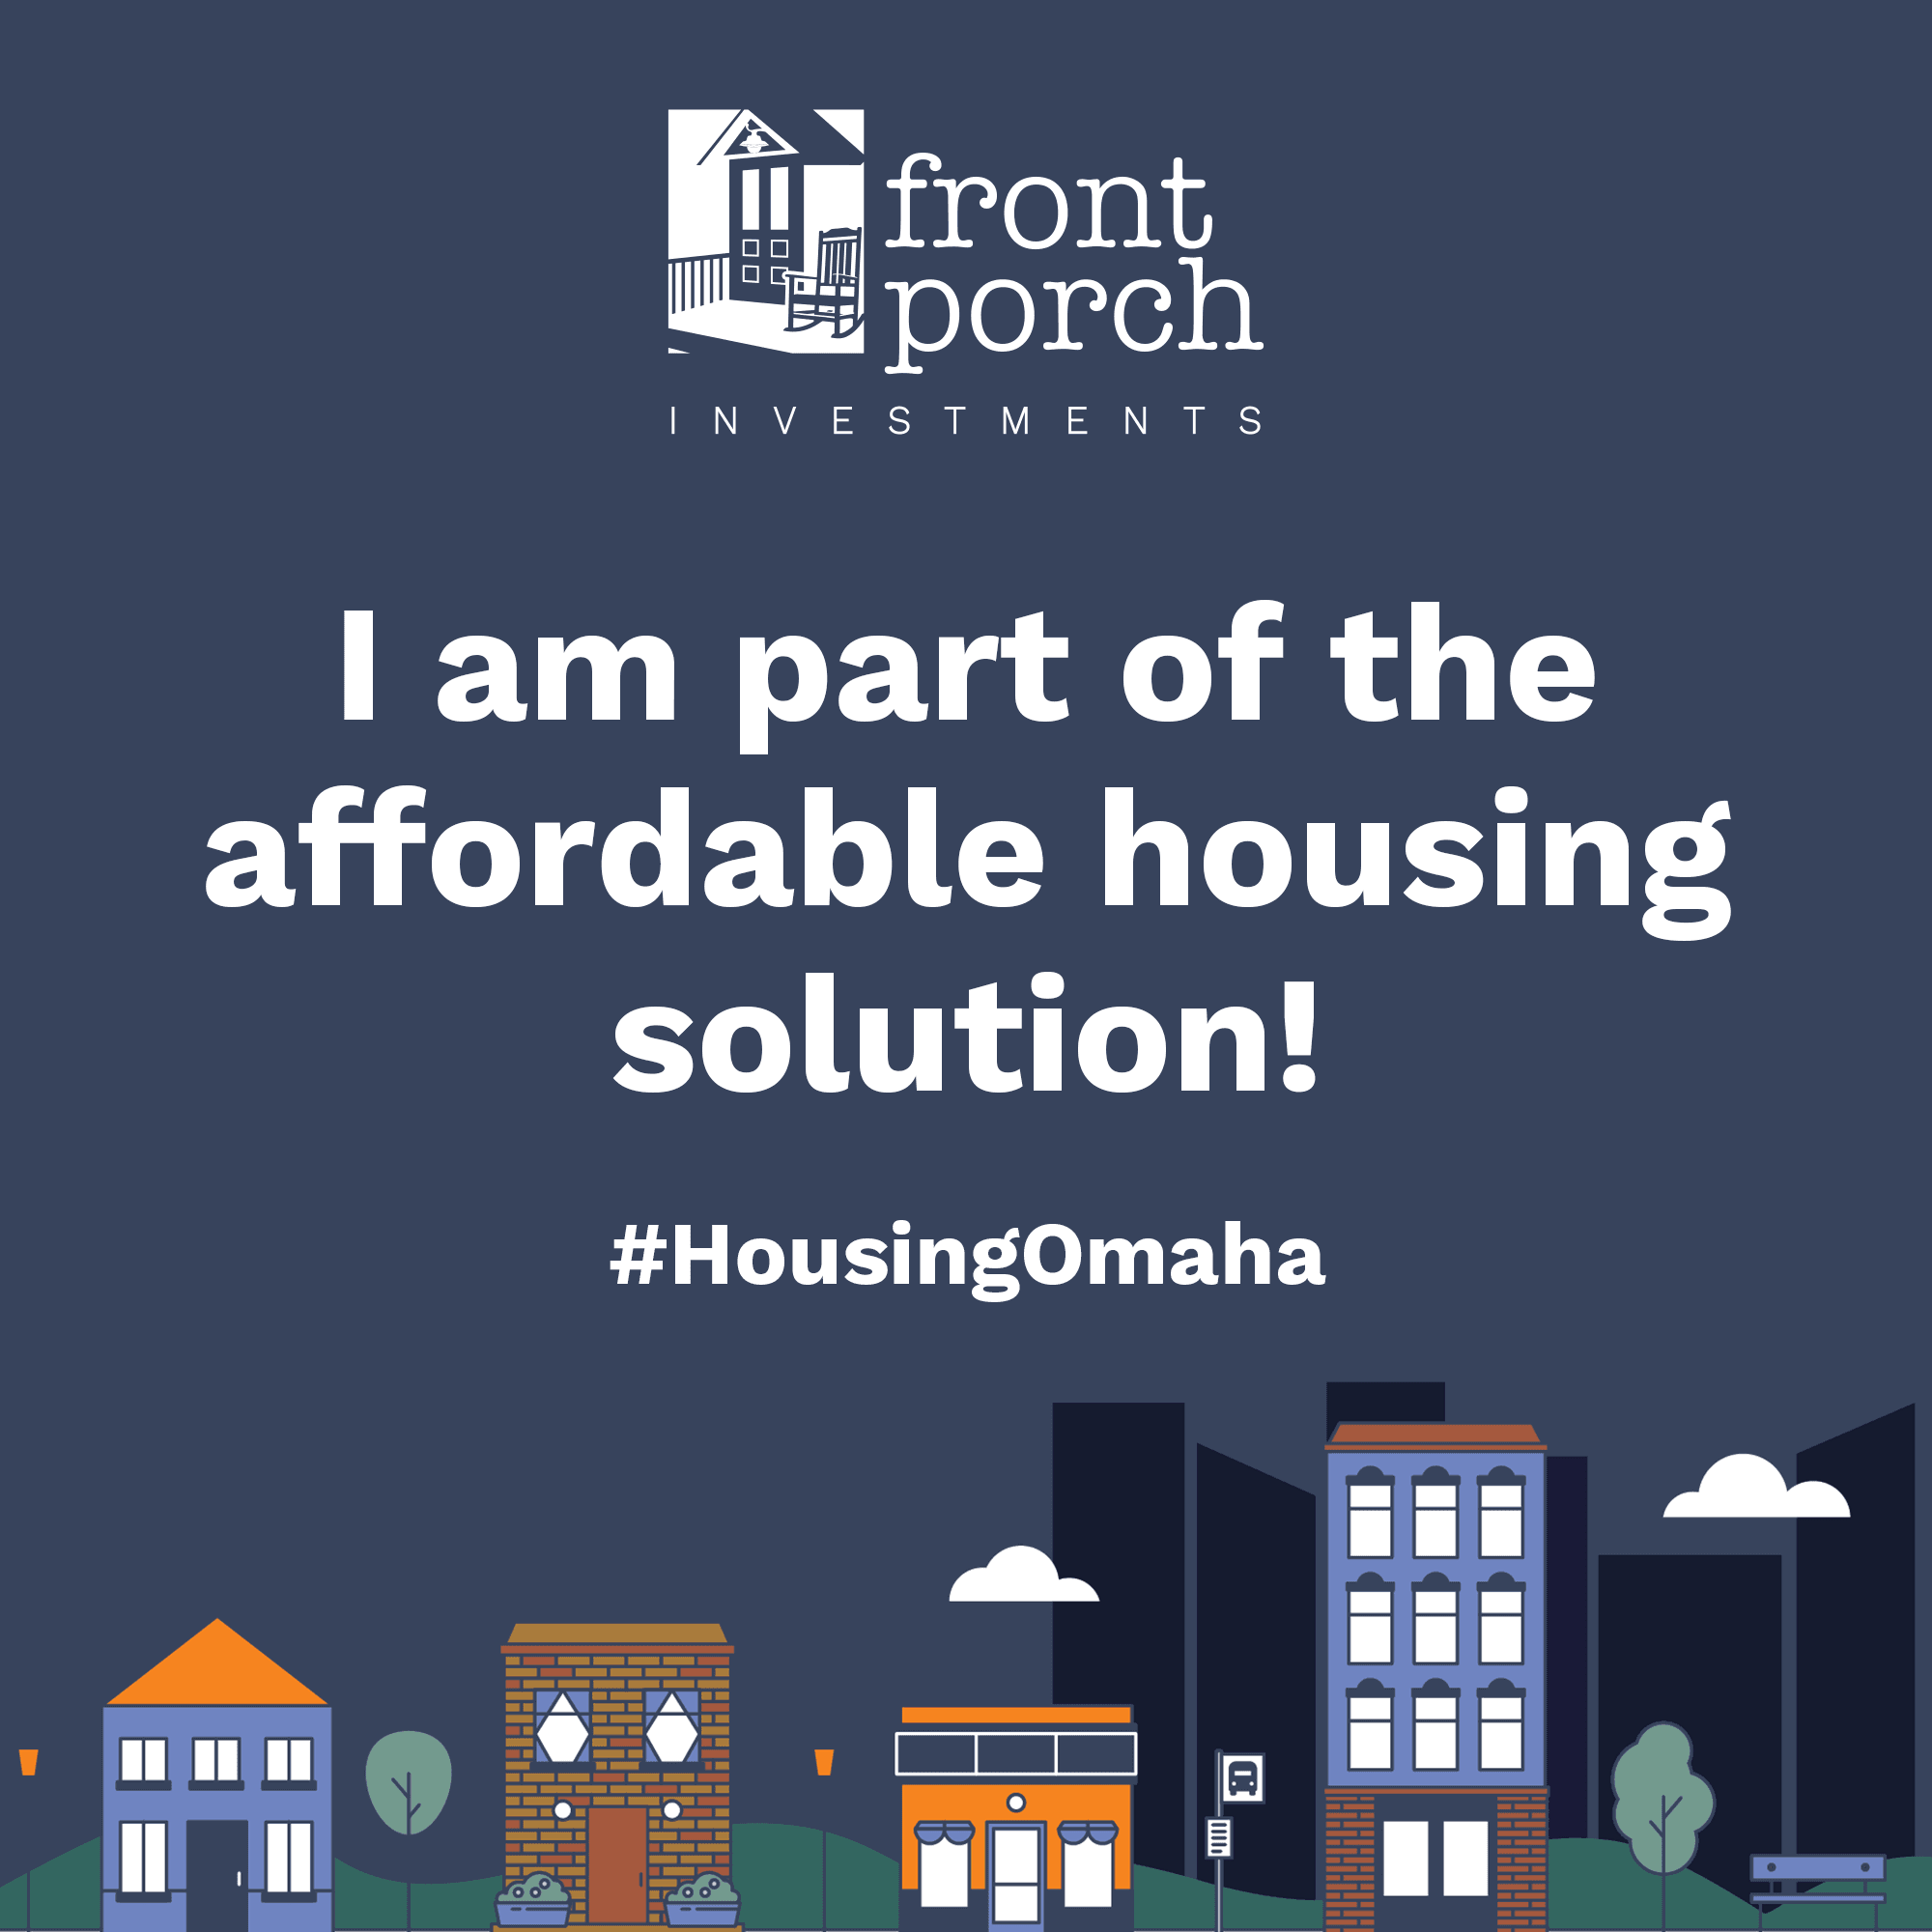 Square graphic with a dark navy blue background. The Front Porch Investments logo is included in white at the top. "I am part of the affordable housing solution" in large white text is in the center. The hashtag #HousingOmaha is also present, with graphic